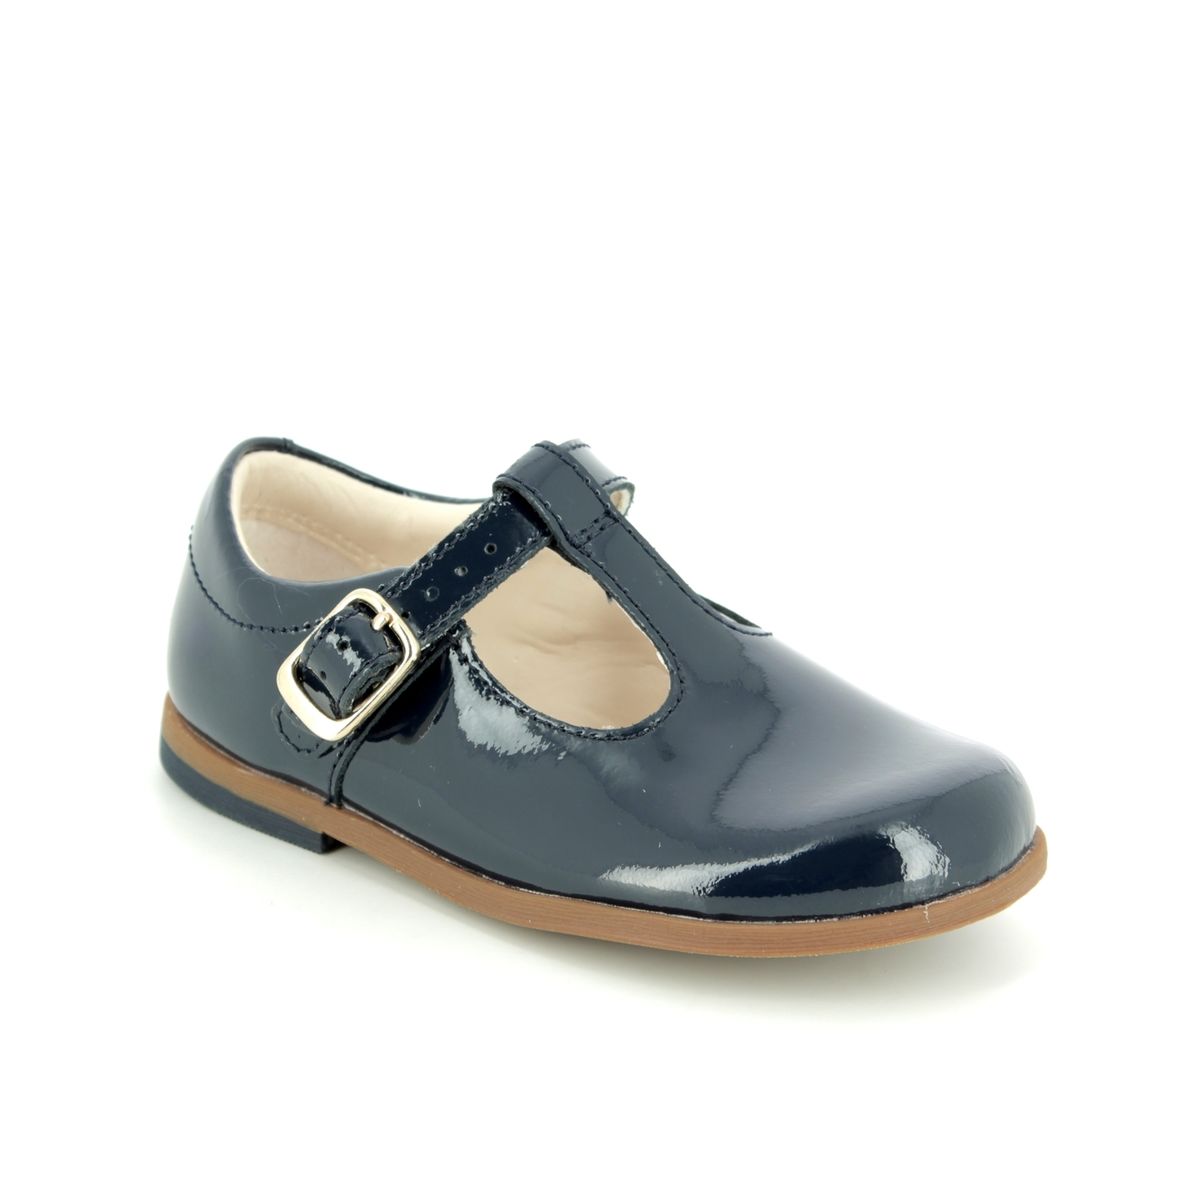 clarks navy patent shoes